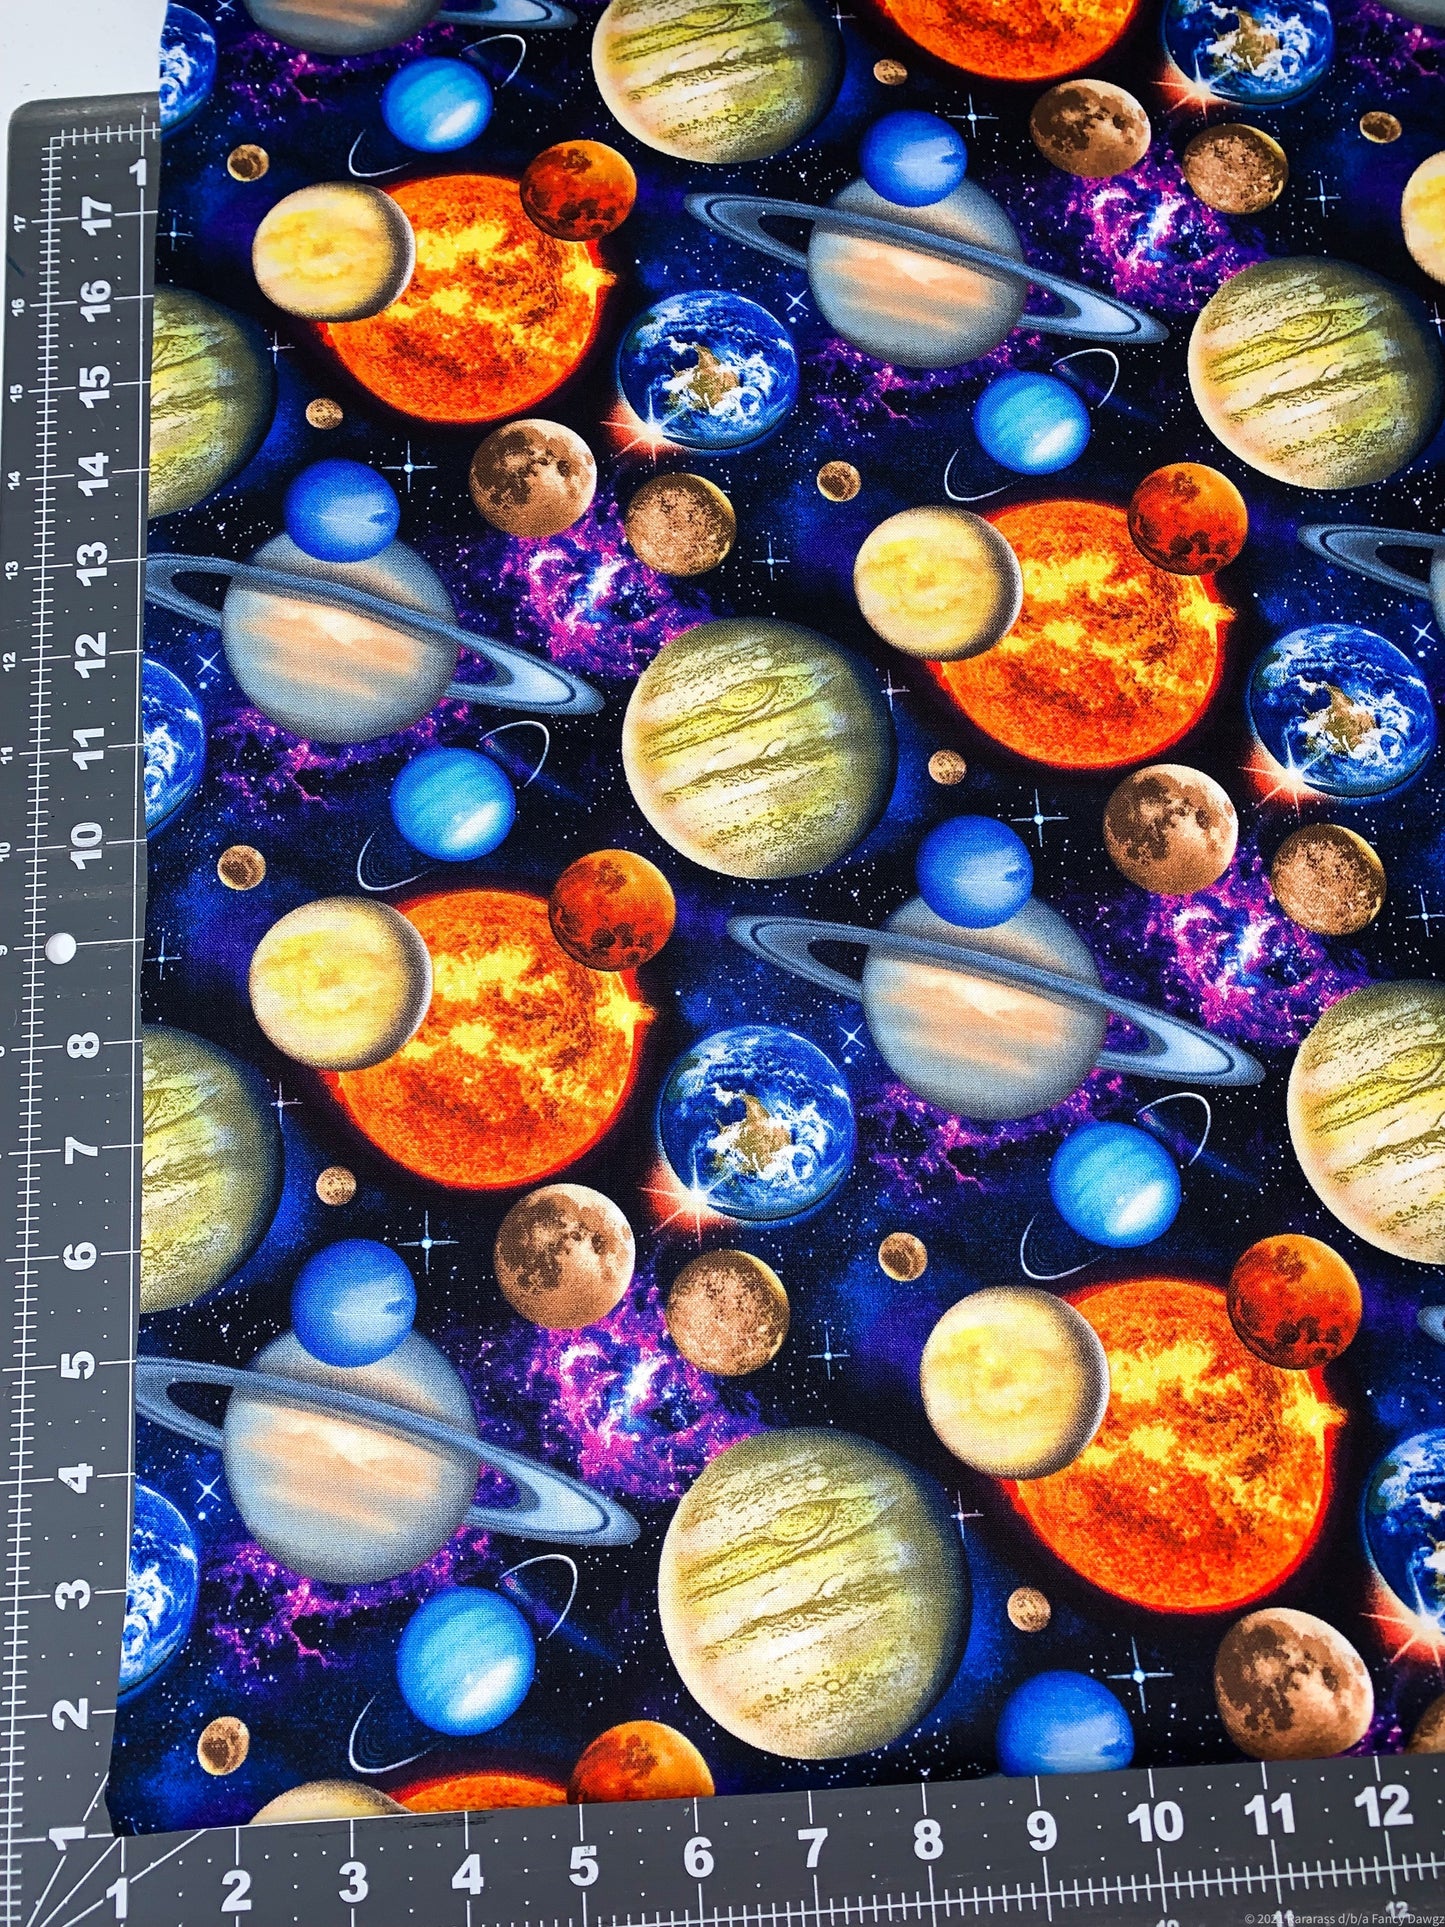 In Space fabric 1331 Planets fabric, Earth Sun Moon